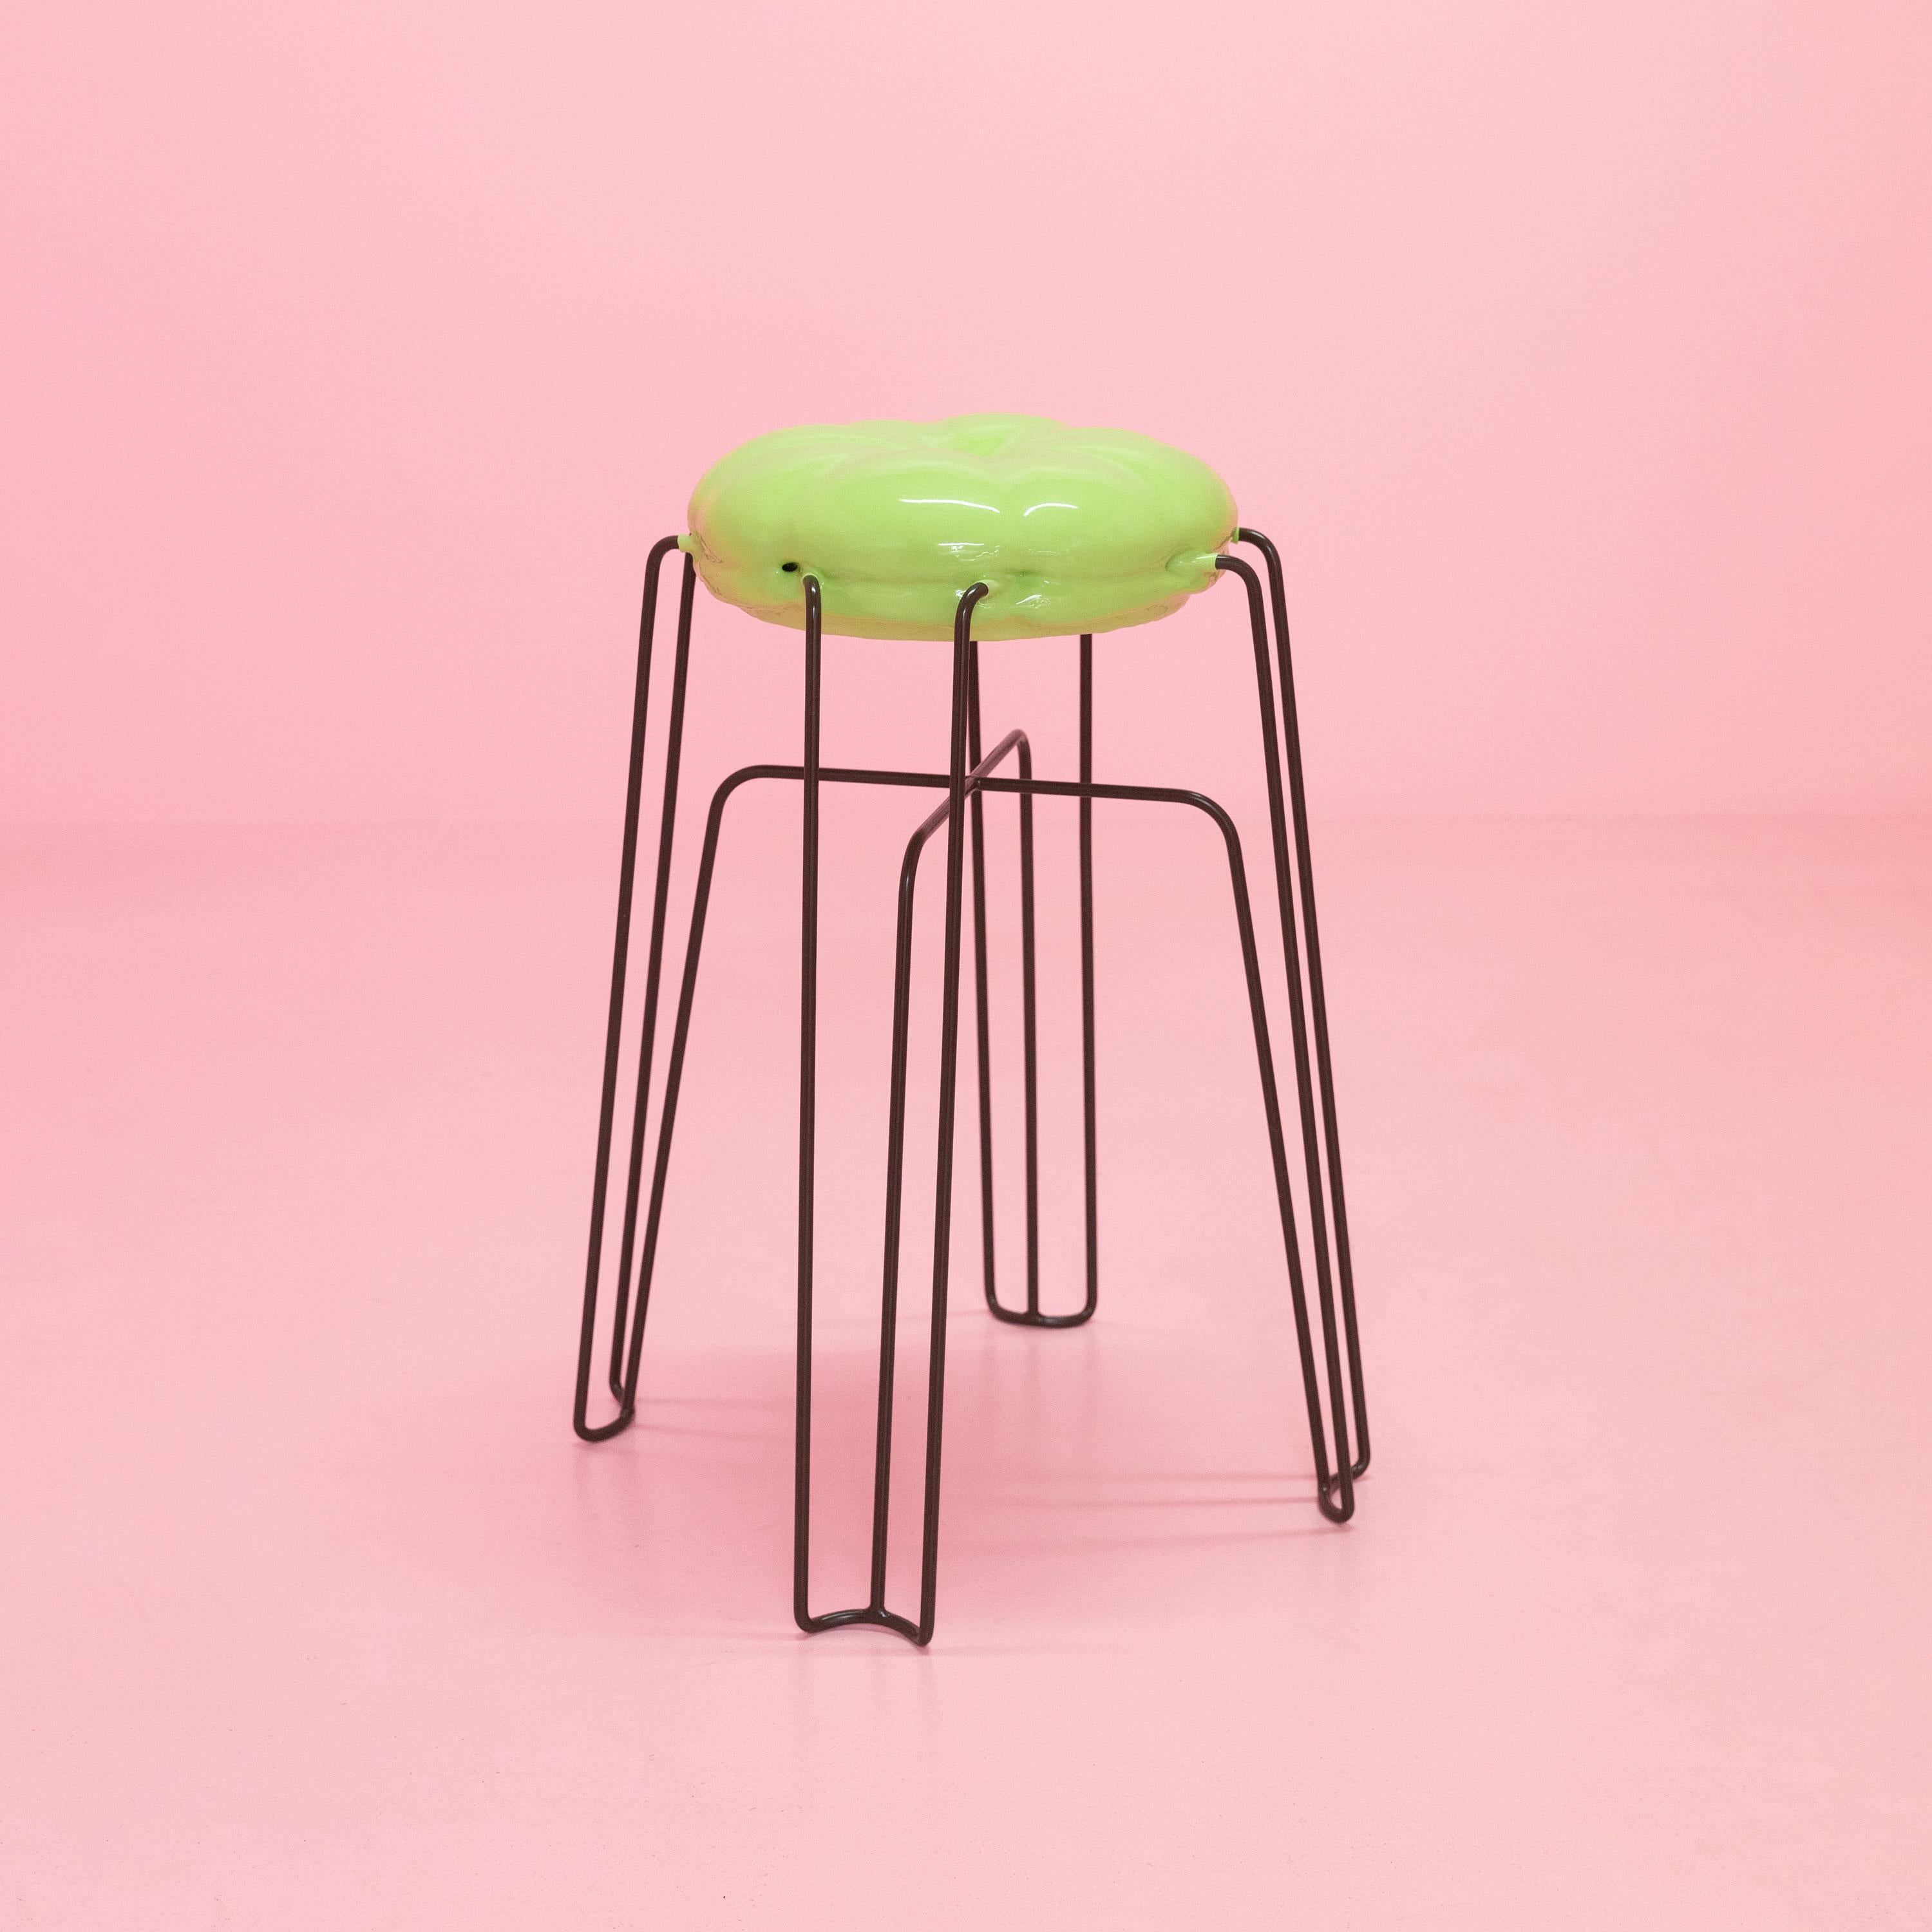 Each Marshmallow Soft Foam Stool is unique as there is no mold used to make the cushion. The foam expands through the stool's wire frame structure creating a one of a kind piece every time.